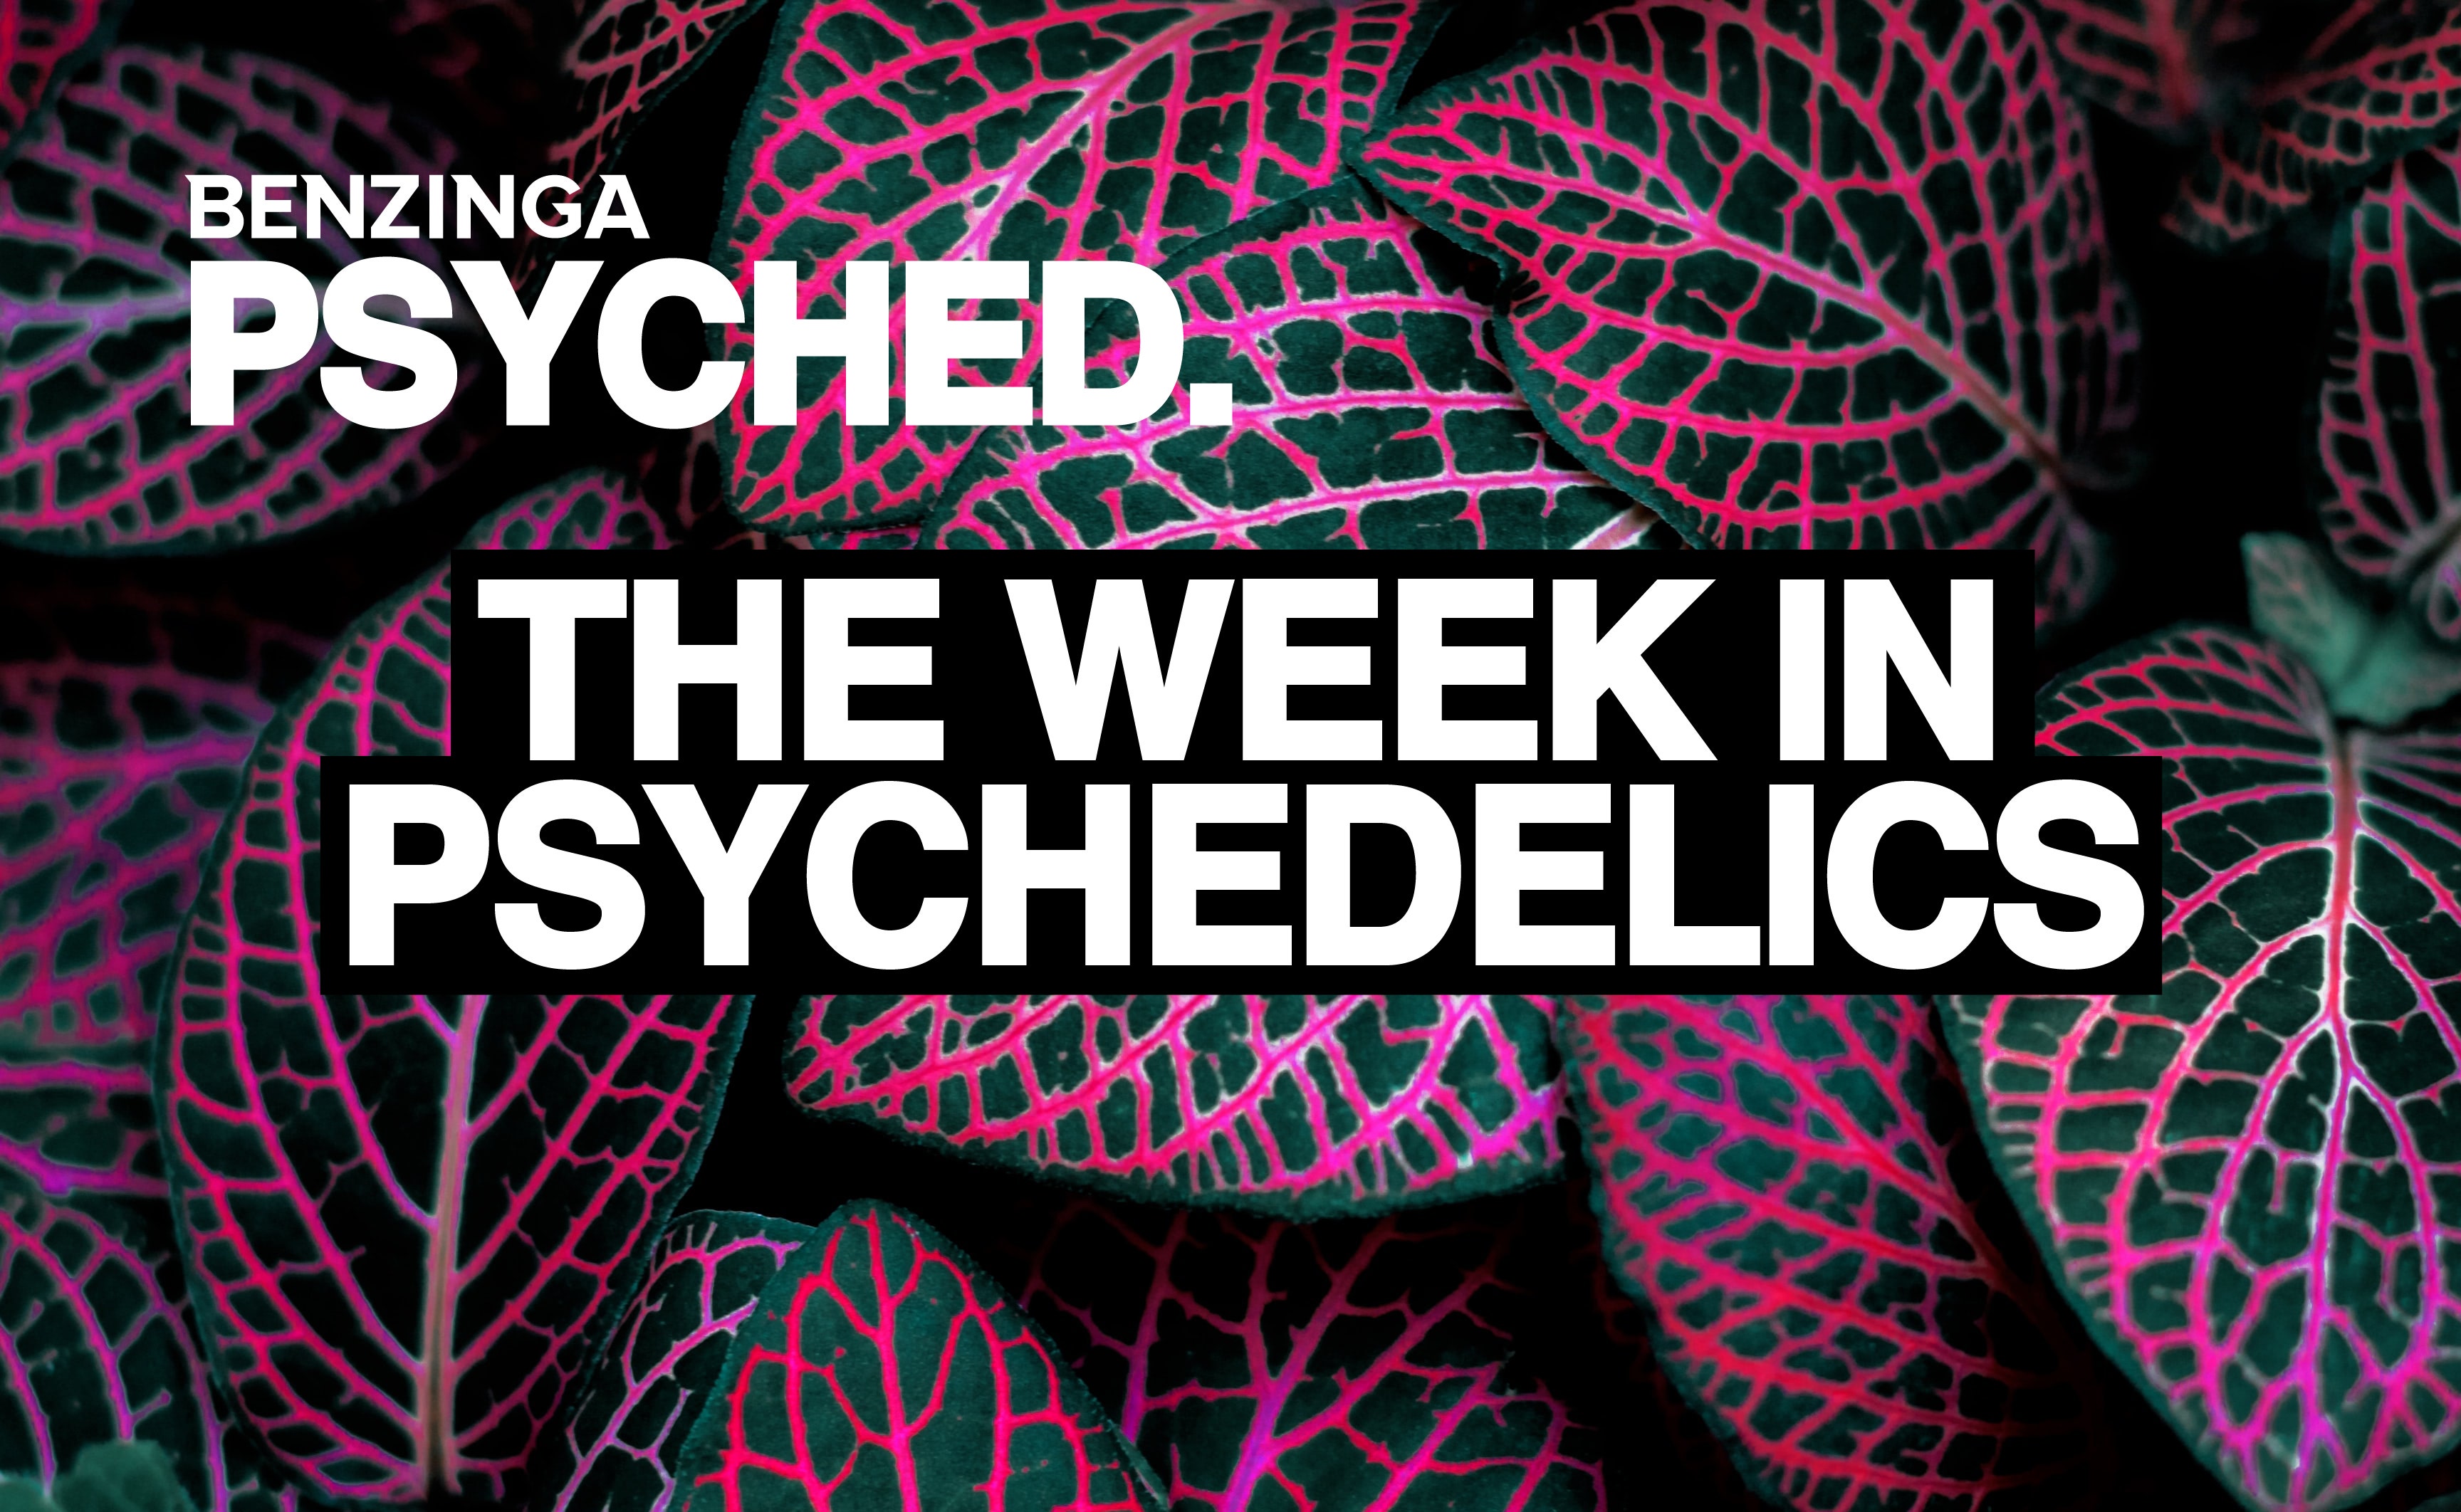 Psyched: Elon Musk Discusses Psychedelics, Delix Raises $70M, MindCure To Study MDMA In Female Sexual Dysfunction